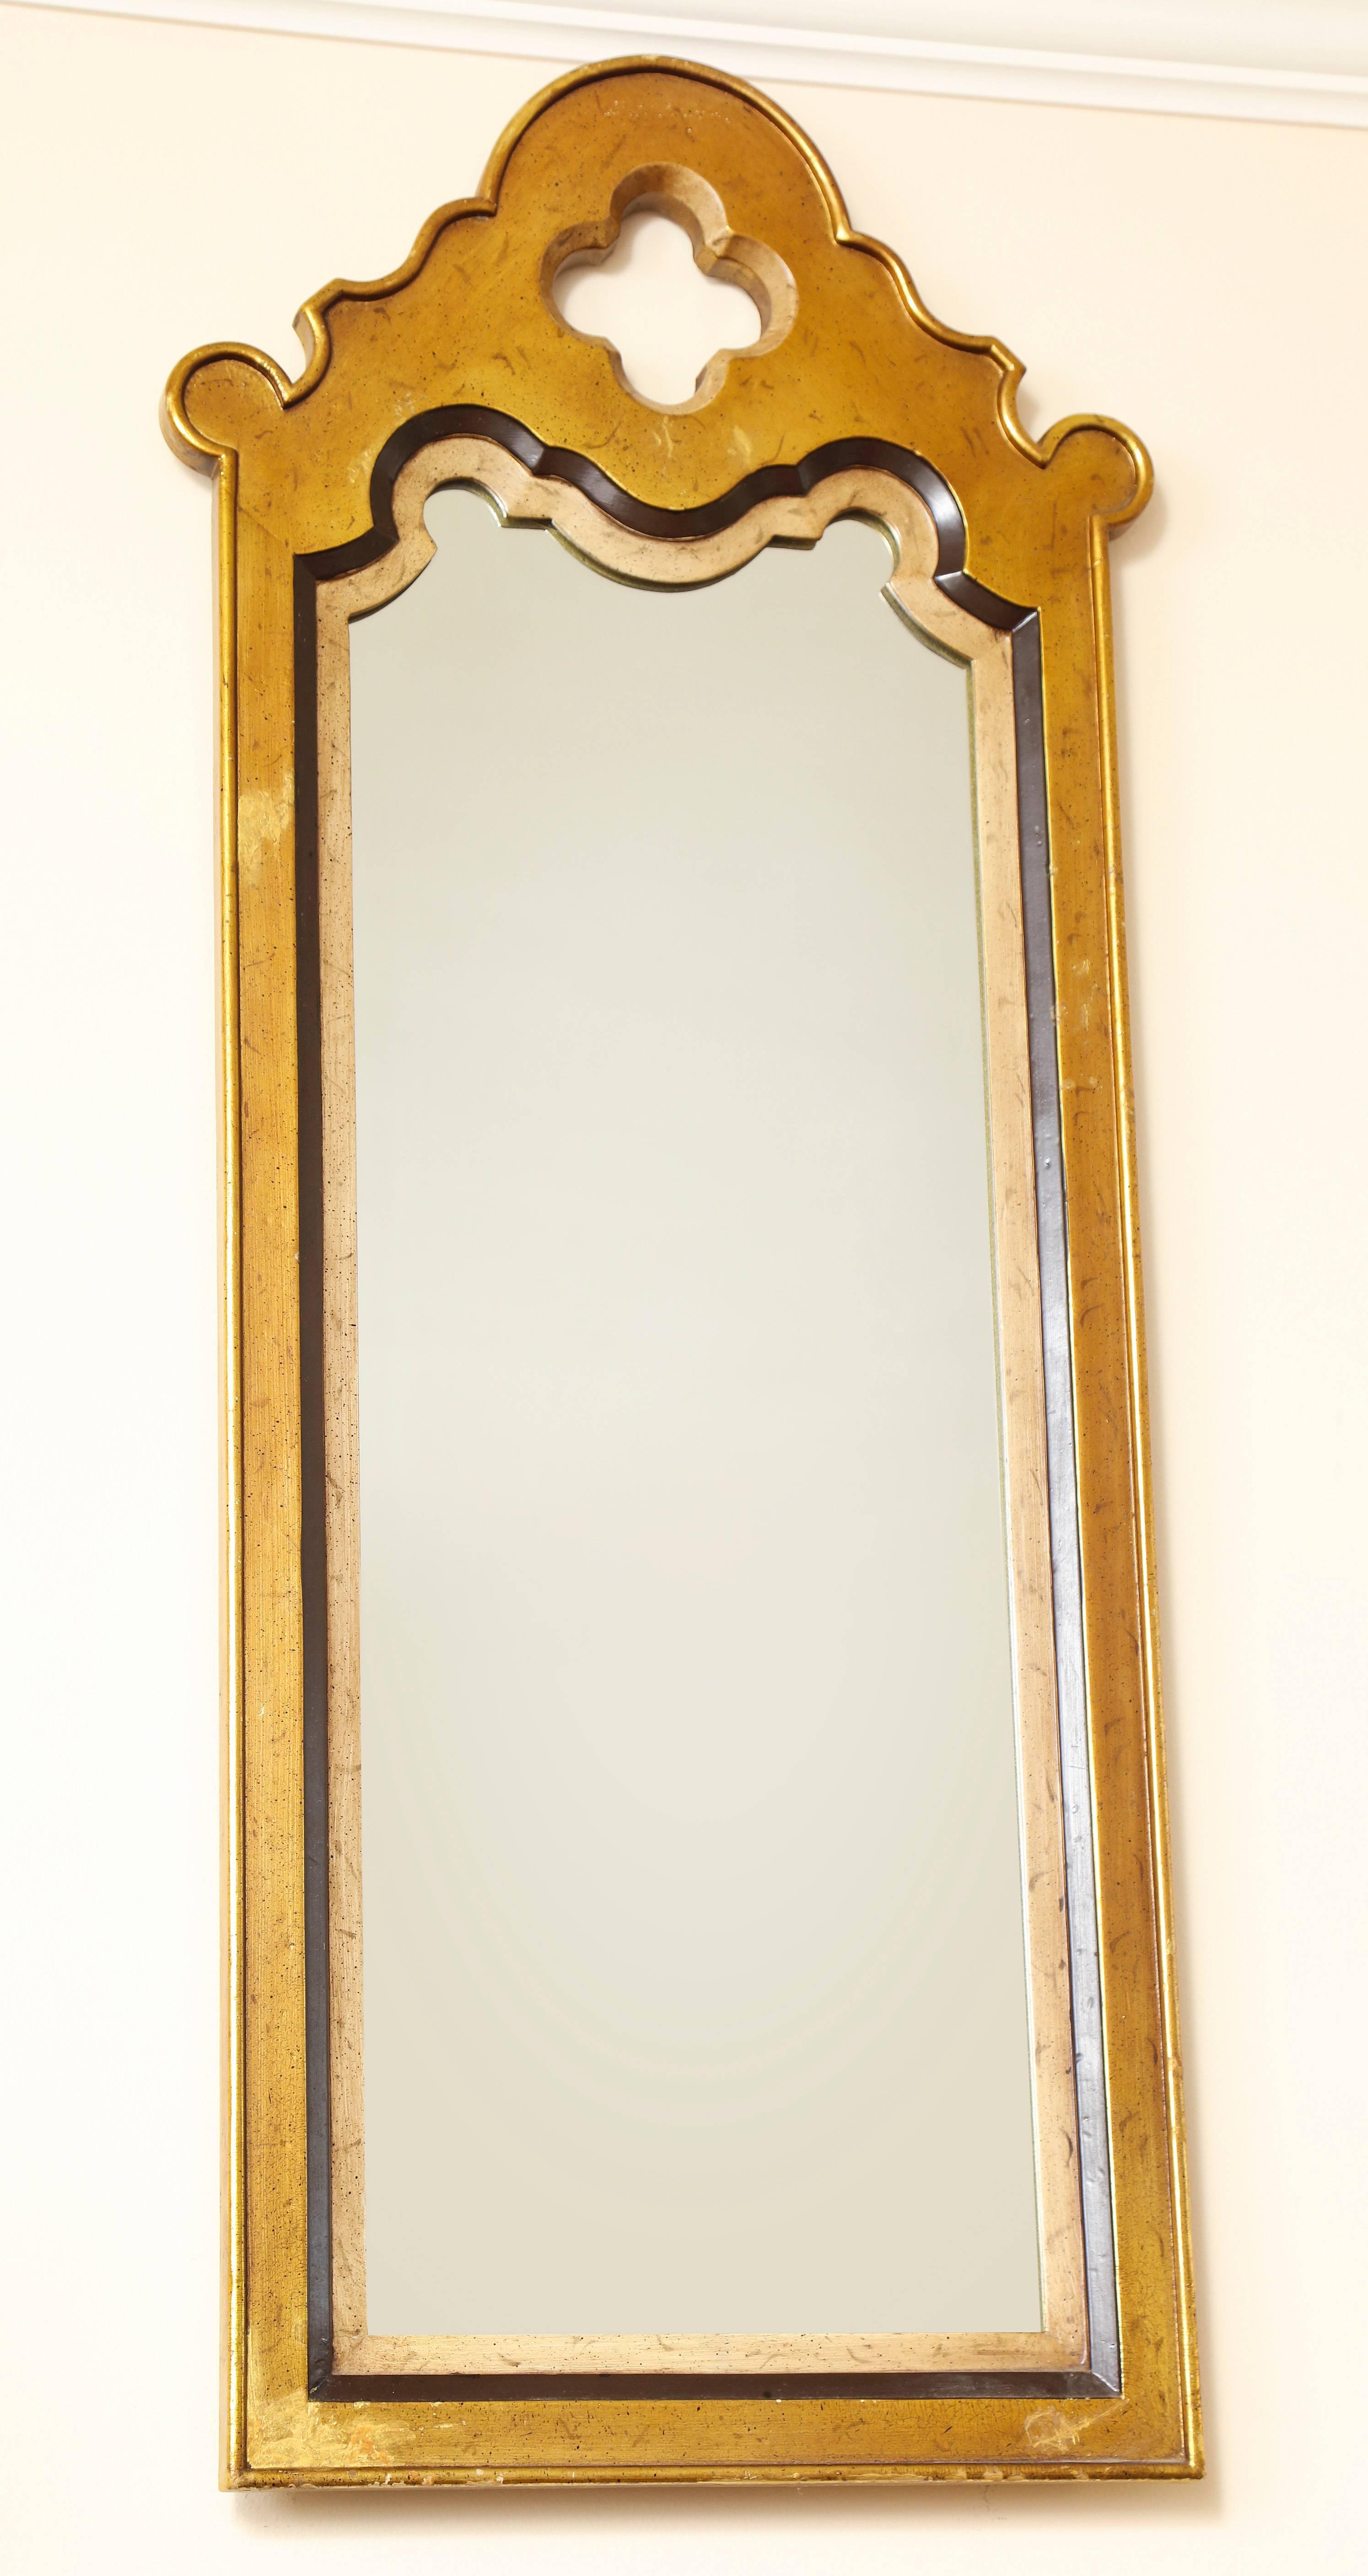 A striking Mid-Century Modern tall and narrow wall mirror with quatrefoil crown; having a Moorish design influence. Made by Drexel Heritage in the Hollywood Regency style with patinated gold and silver leaf finish. Original stamp on back with